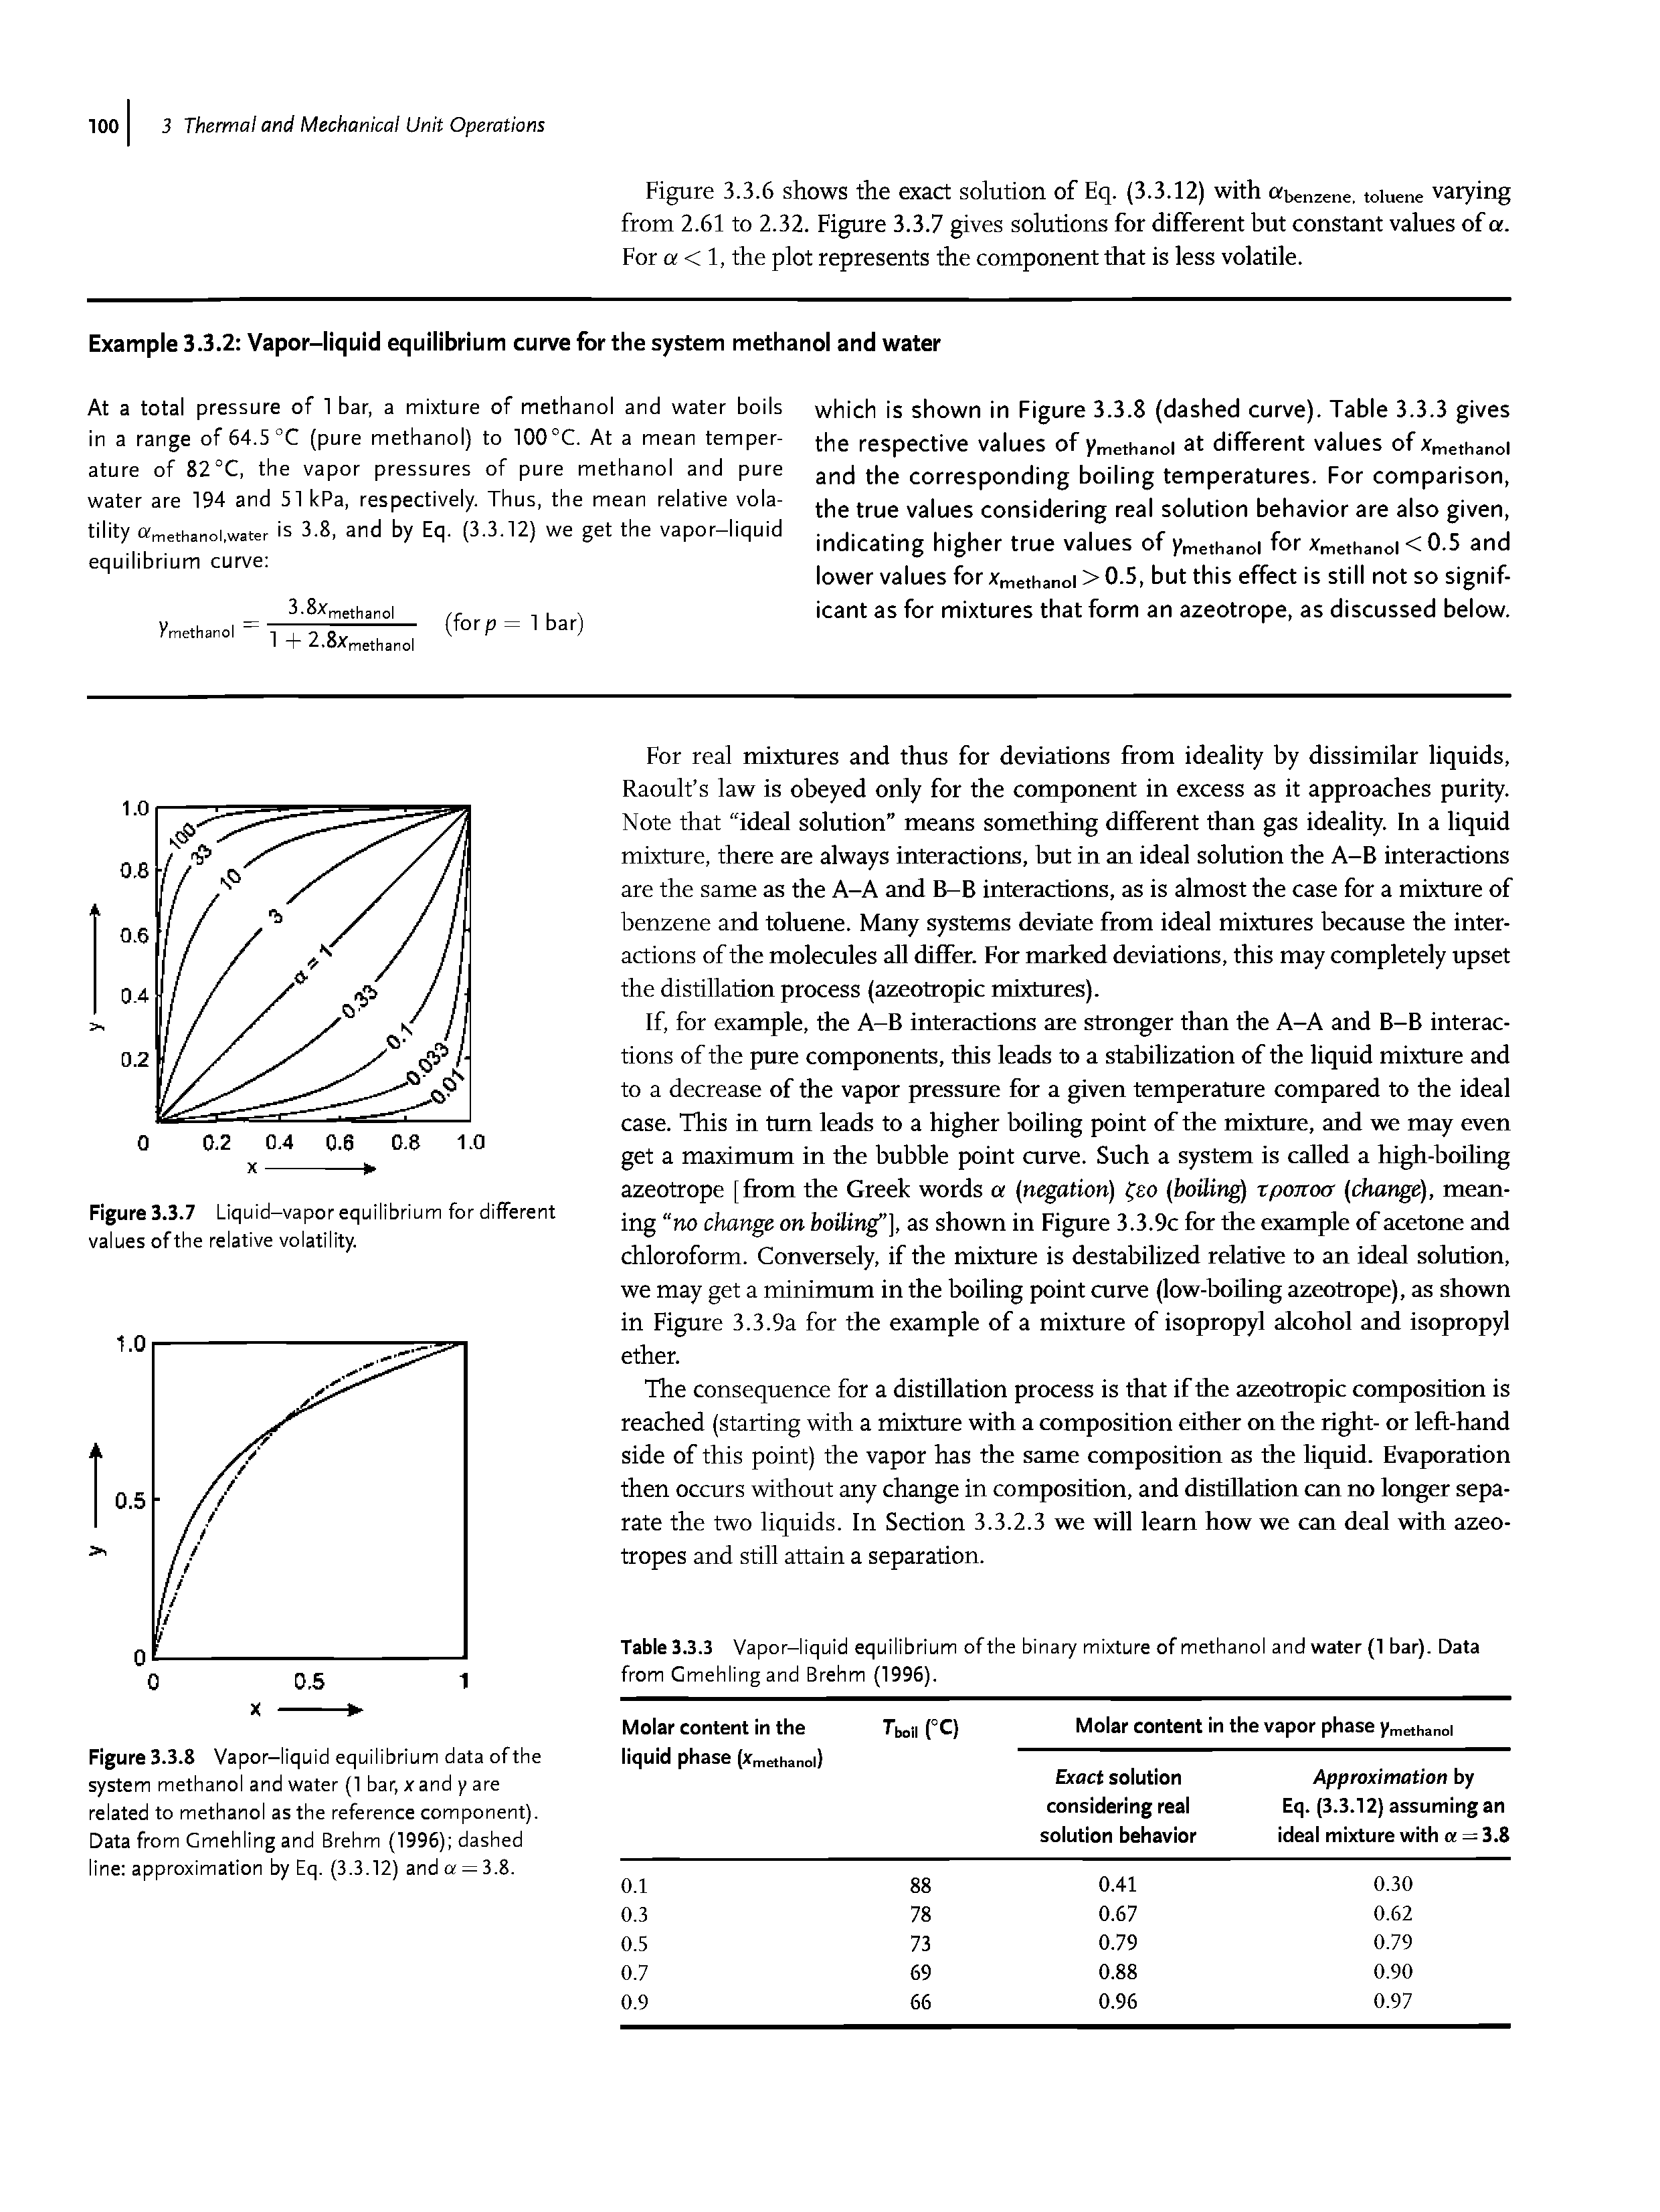 Table 3.3.3 Vapor-liquid equilibrium of the bina mixture of methanol and water (1 bar). Data from Cmehling and Brehm (1996).